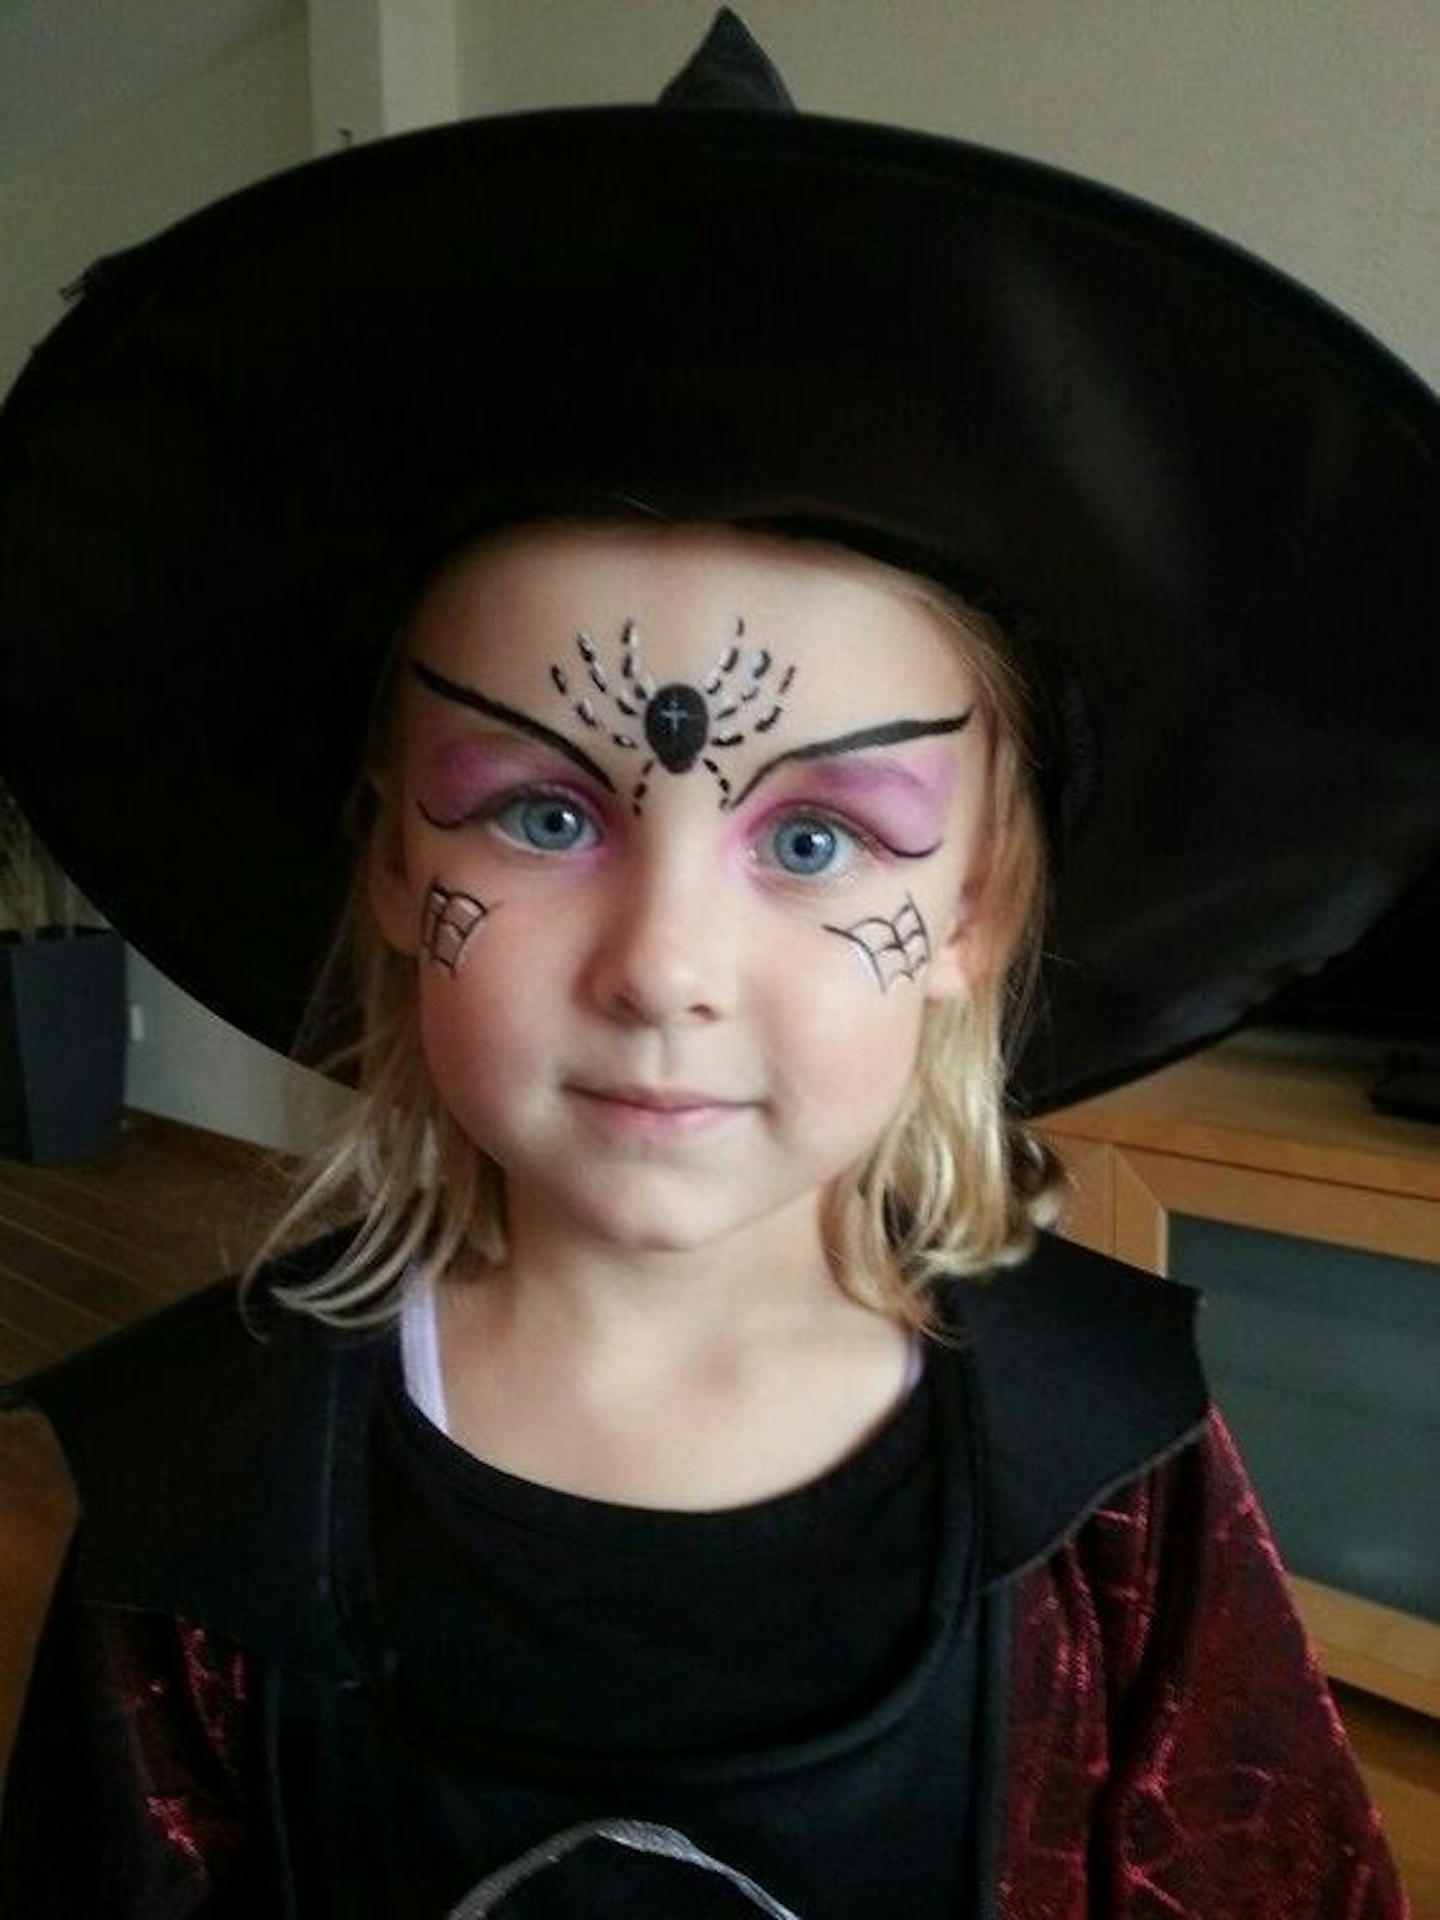 Witch face paint: How to guide and ideas